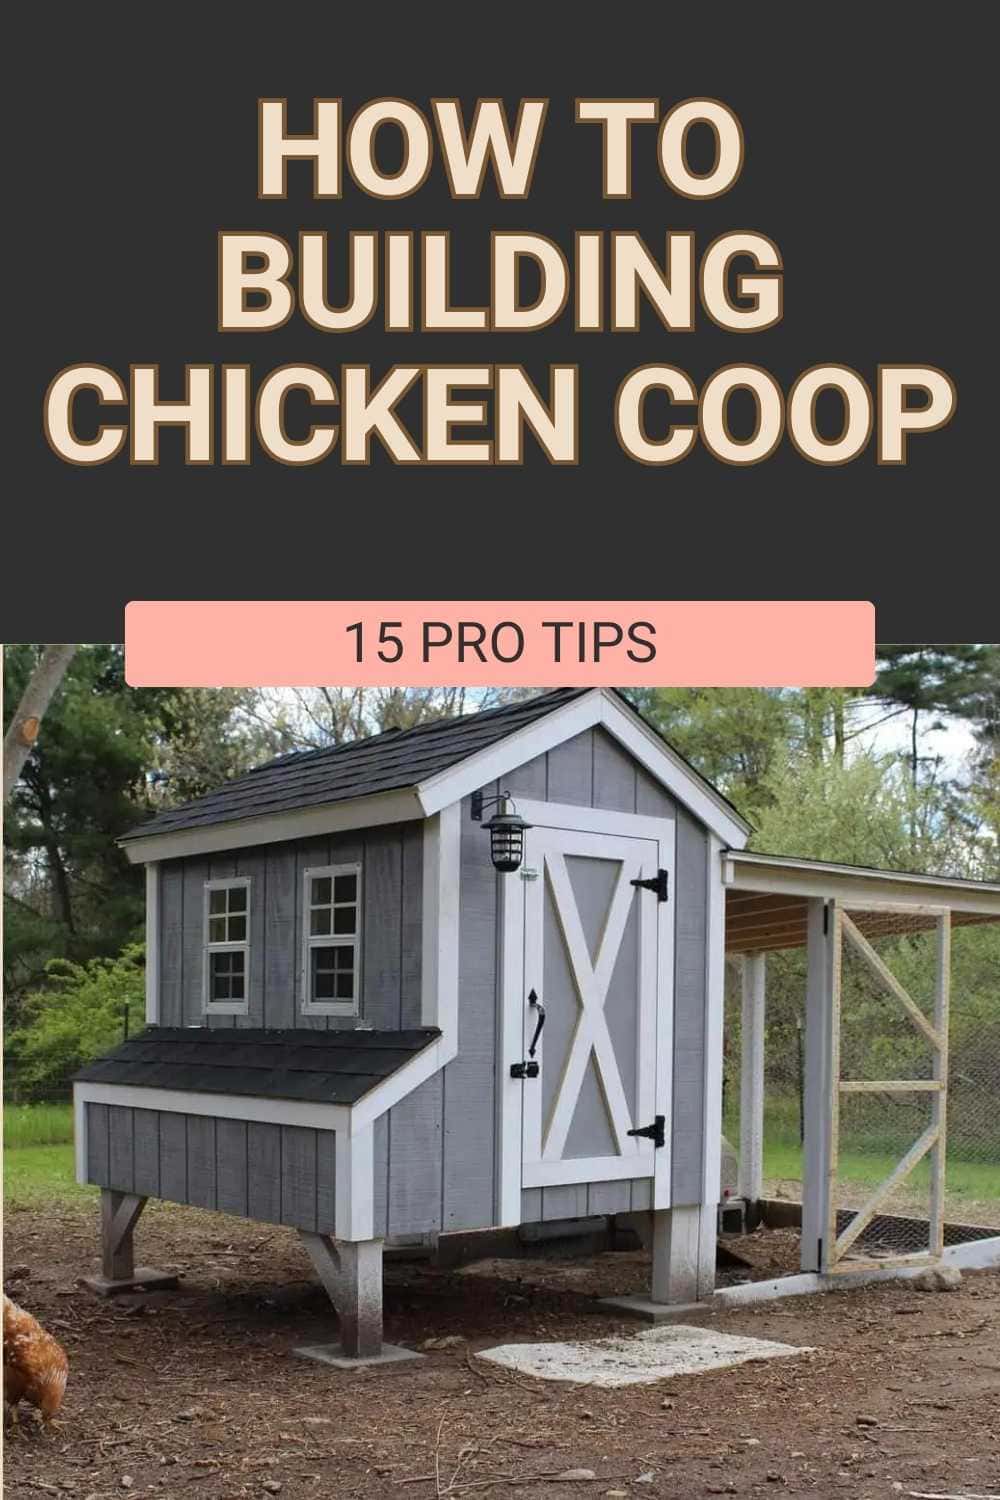 Tips for Building a Chicken Coop Like Expert